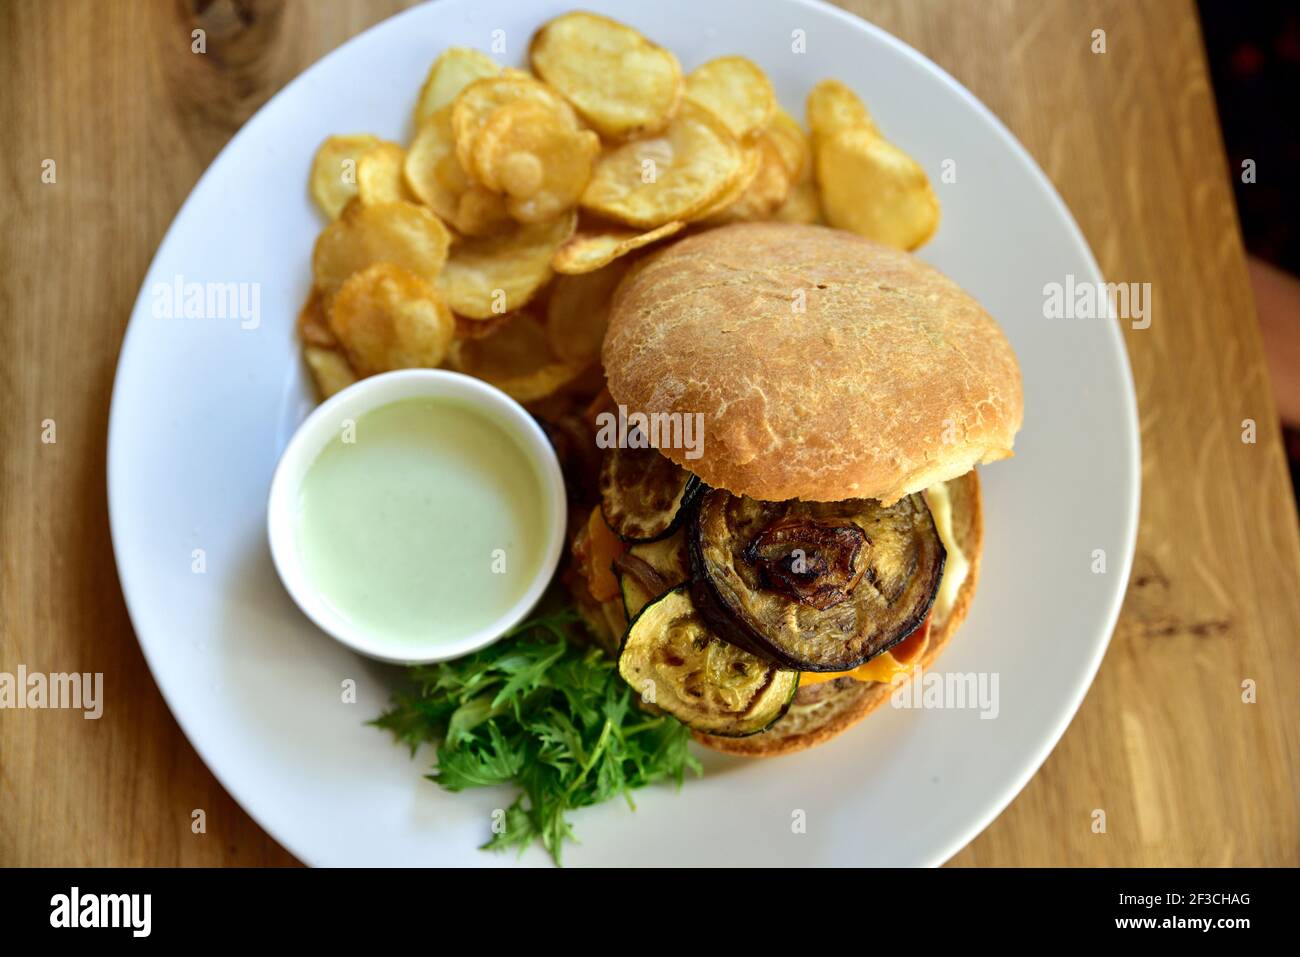 Restaurant food with fresh ingredients - hamburger with cheddar cheese, zucchini, potato slices and tartar sauce Stock Photo